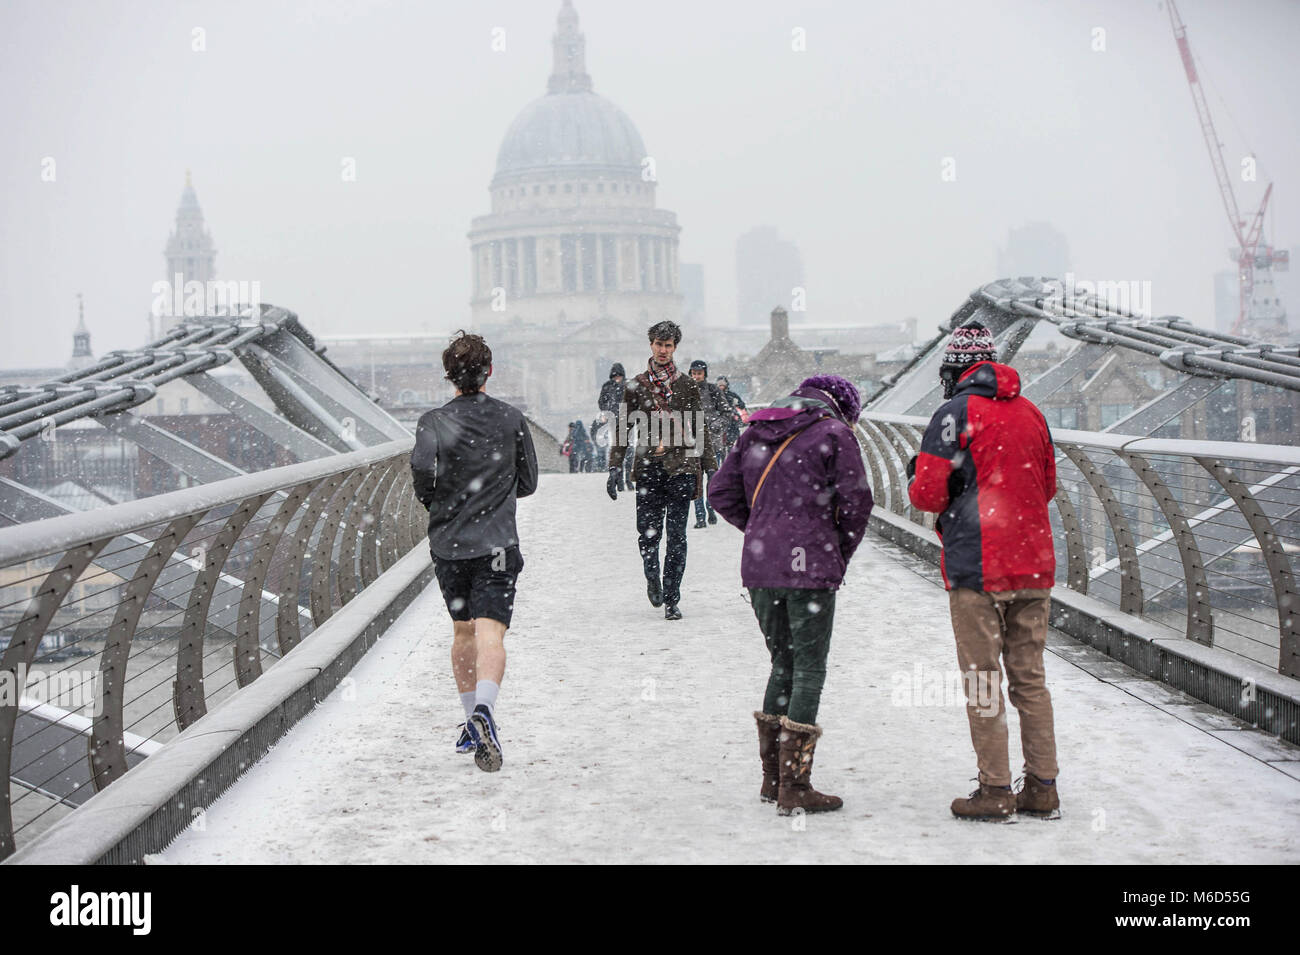 London, UK. 2nd Mar, 2018. People seen at the Millenium Bridge under snowy weather. Credit: B Rouco-3090.jpg/SOPA Images/ZUMA Wire/Alamy Live News Stock Photo